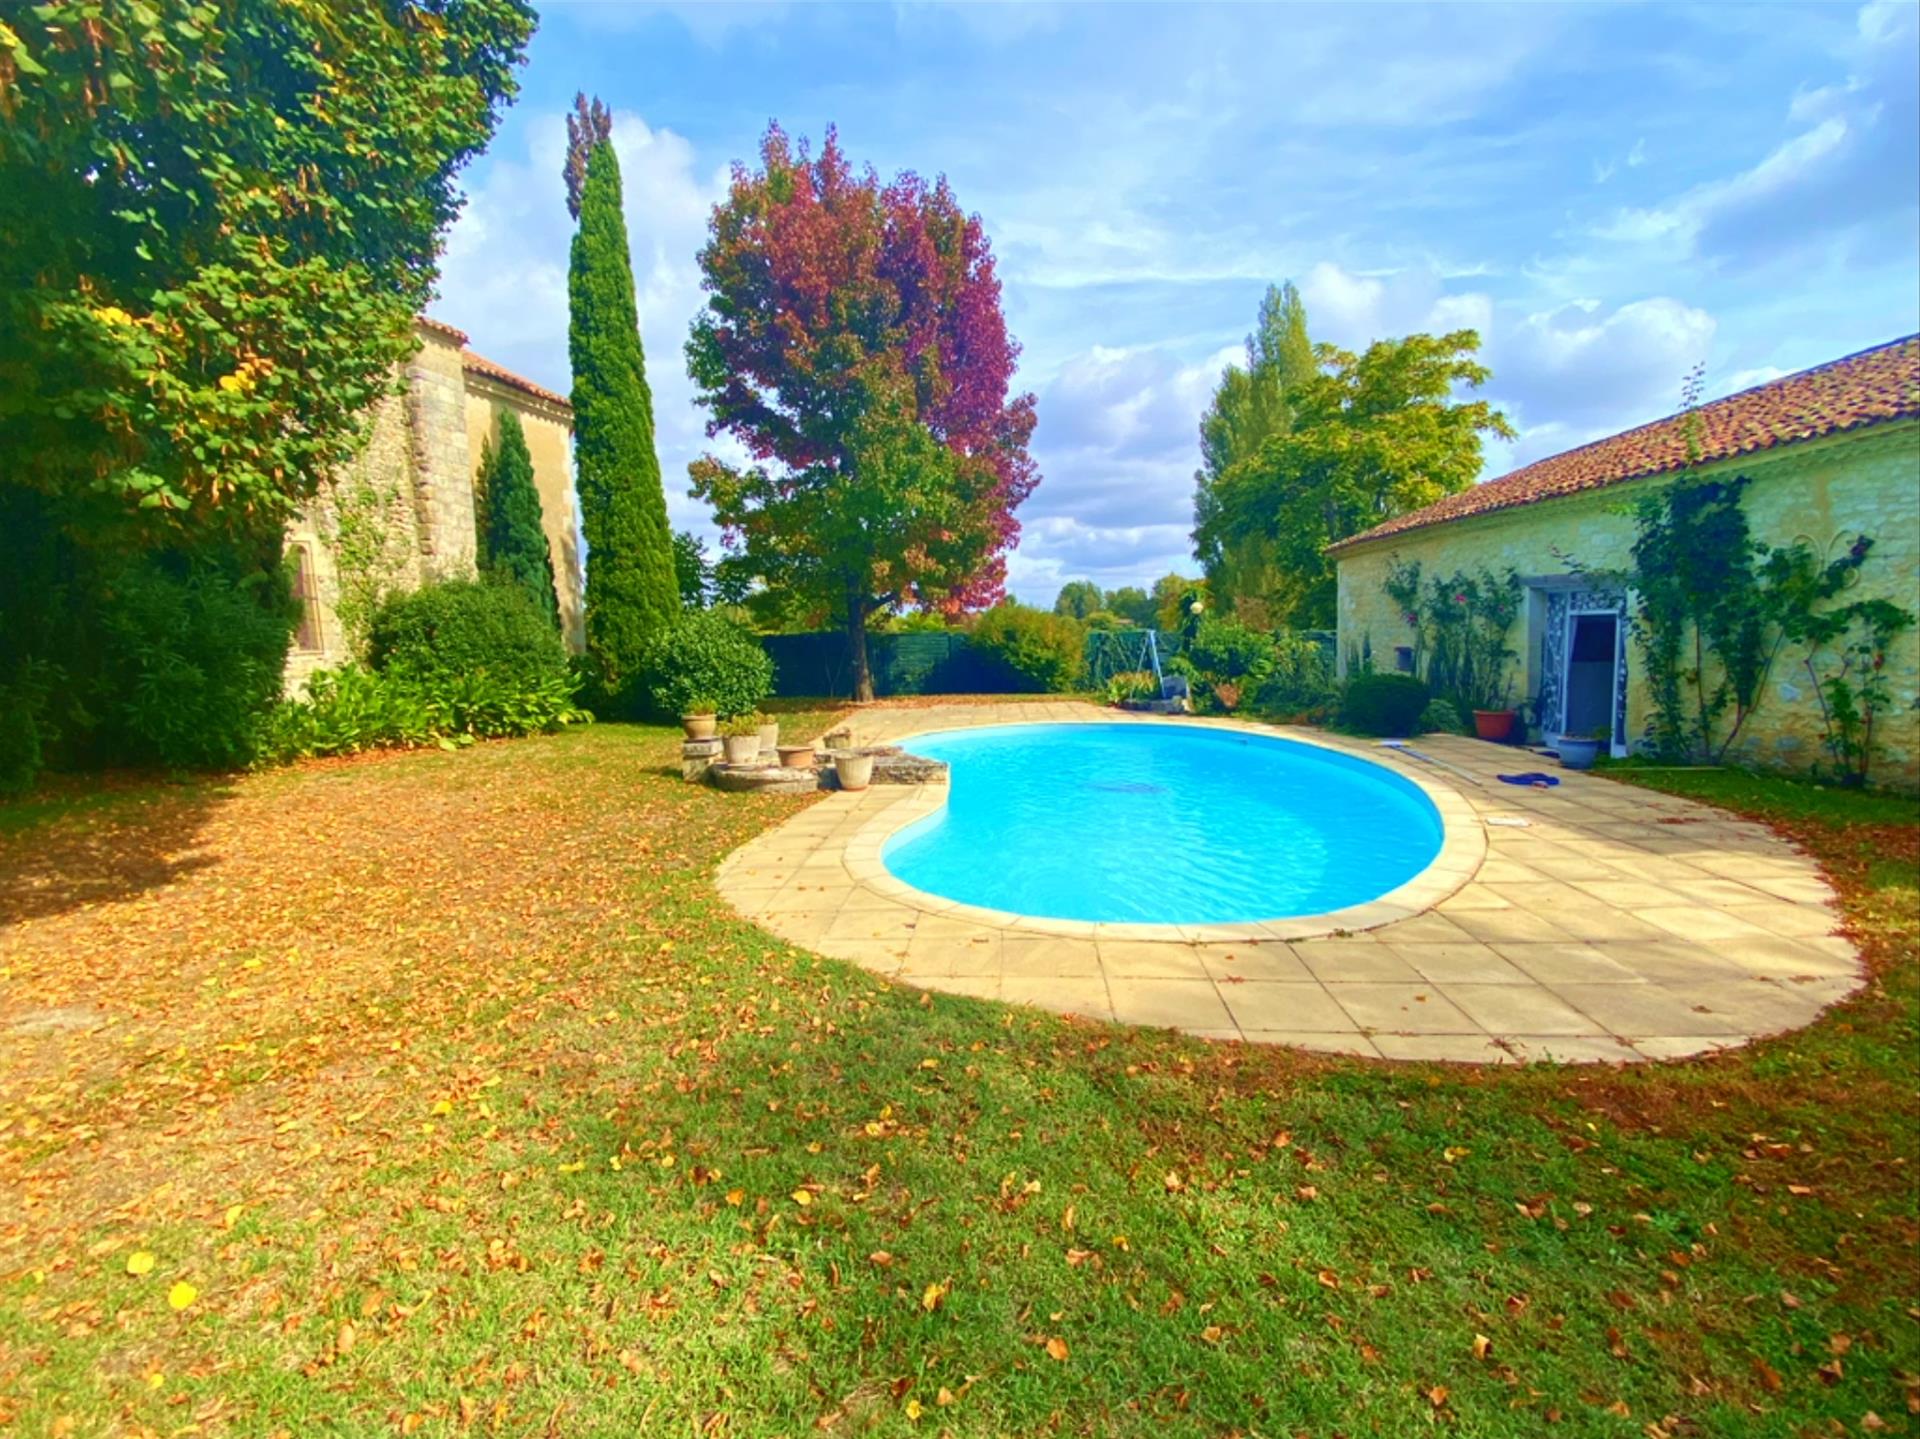 An elegant & spacious home full of character with pool and converted barn minutes from Eymet